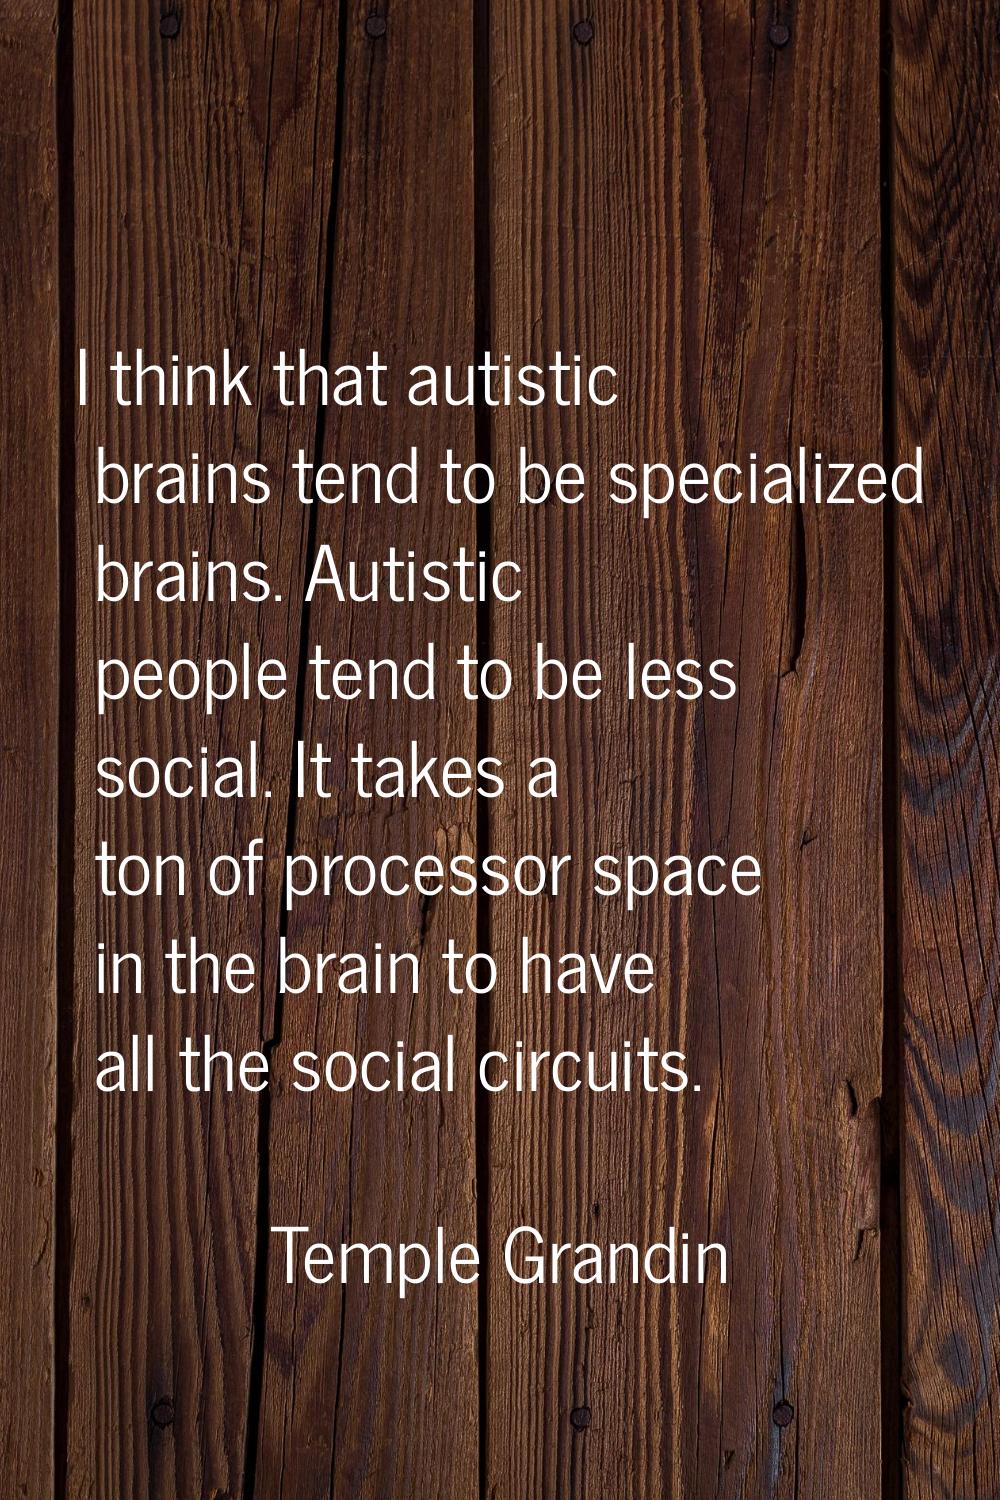 I think that autistic brains tend to be specialized brains. Autistic people tend to be less social.